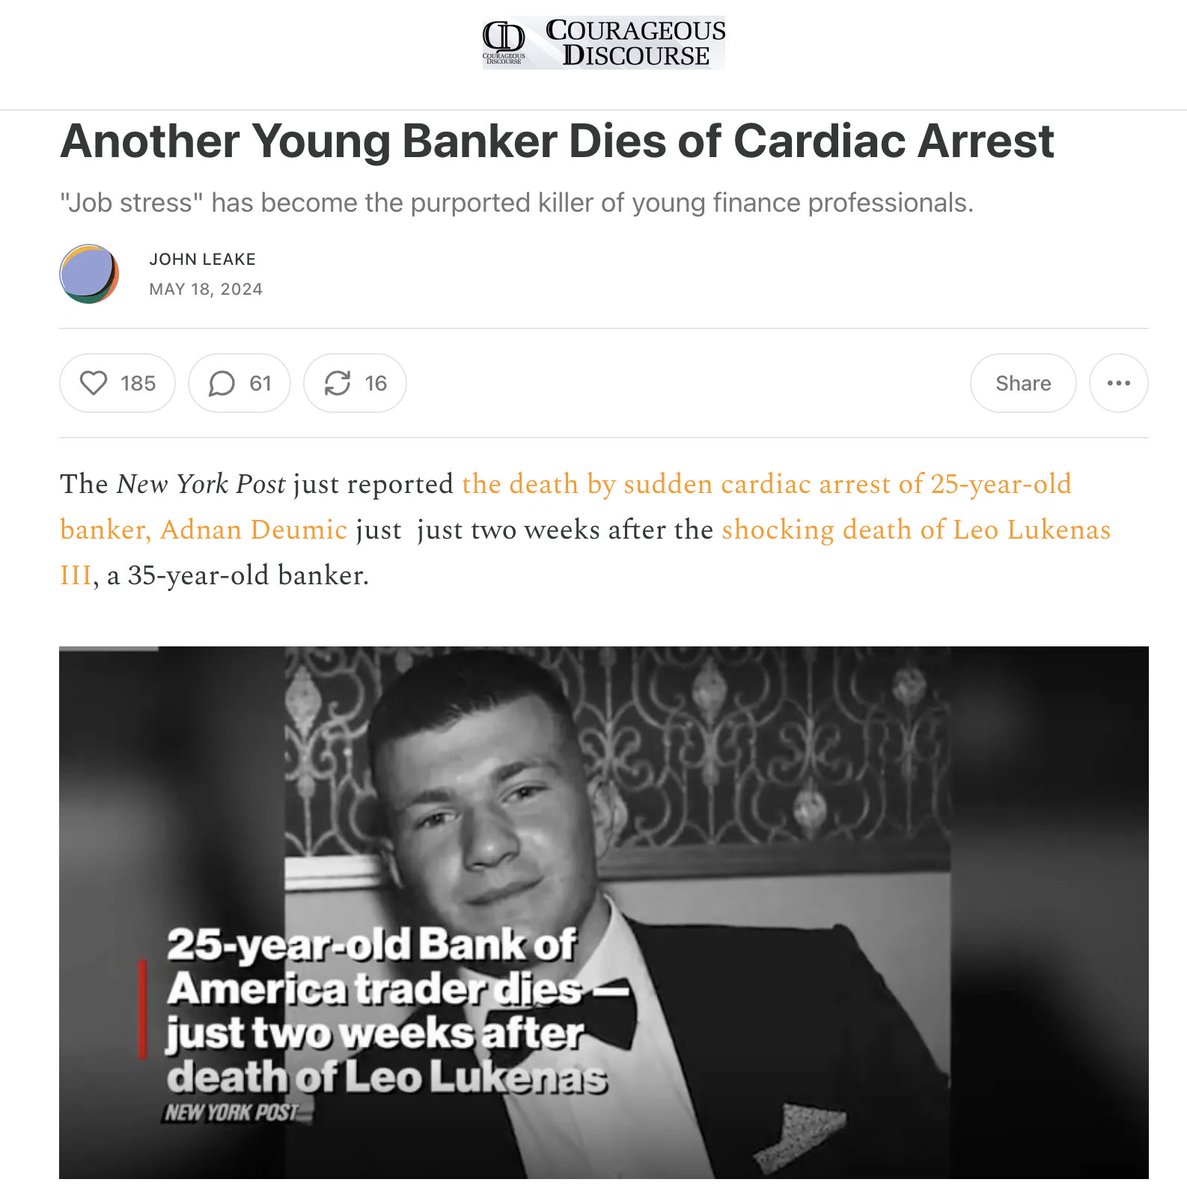 Sudden cardiac deaths of young adults are being normalized and attributed to 'job stress'. Courageous Discourse: petermcculloughmd.substack.com/p/another-youn… #MFScholar @P_McCulloughMD